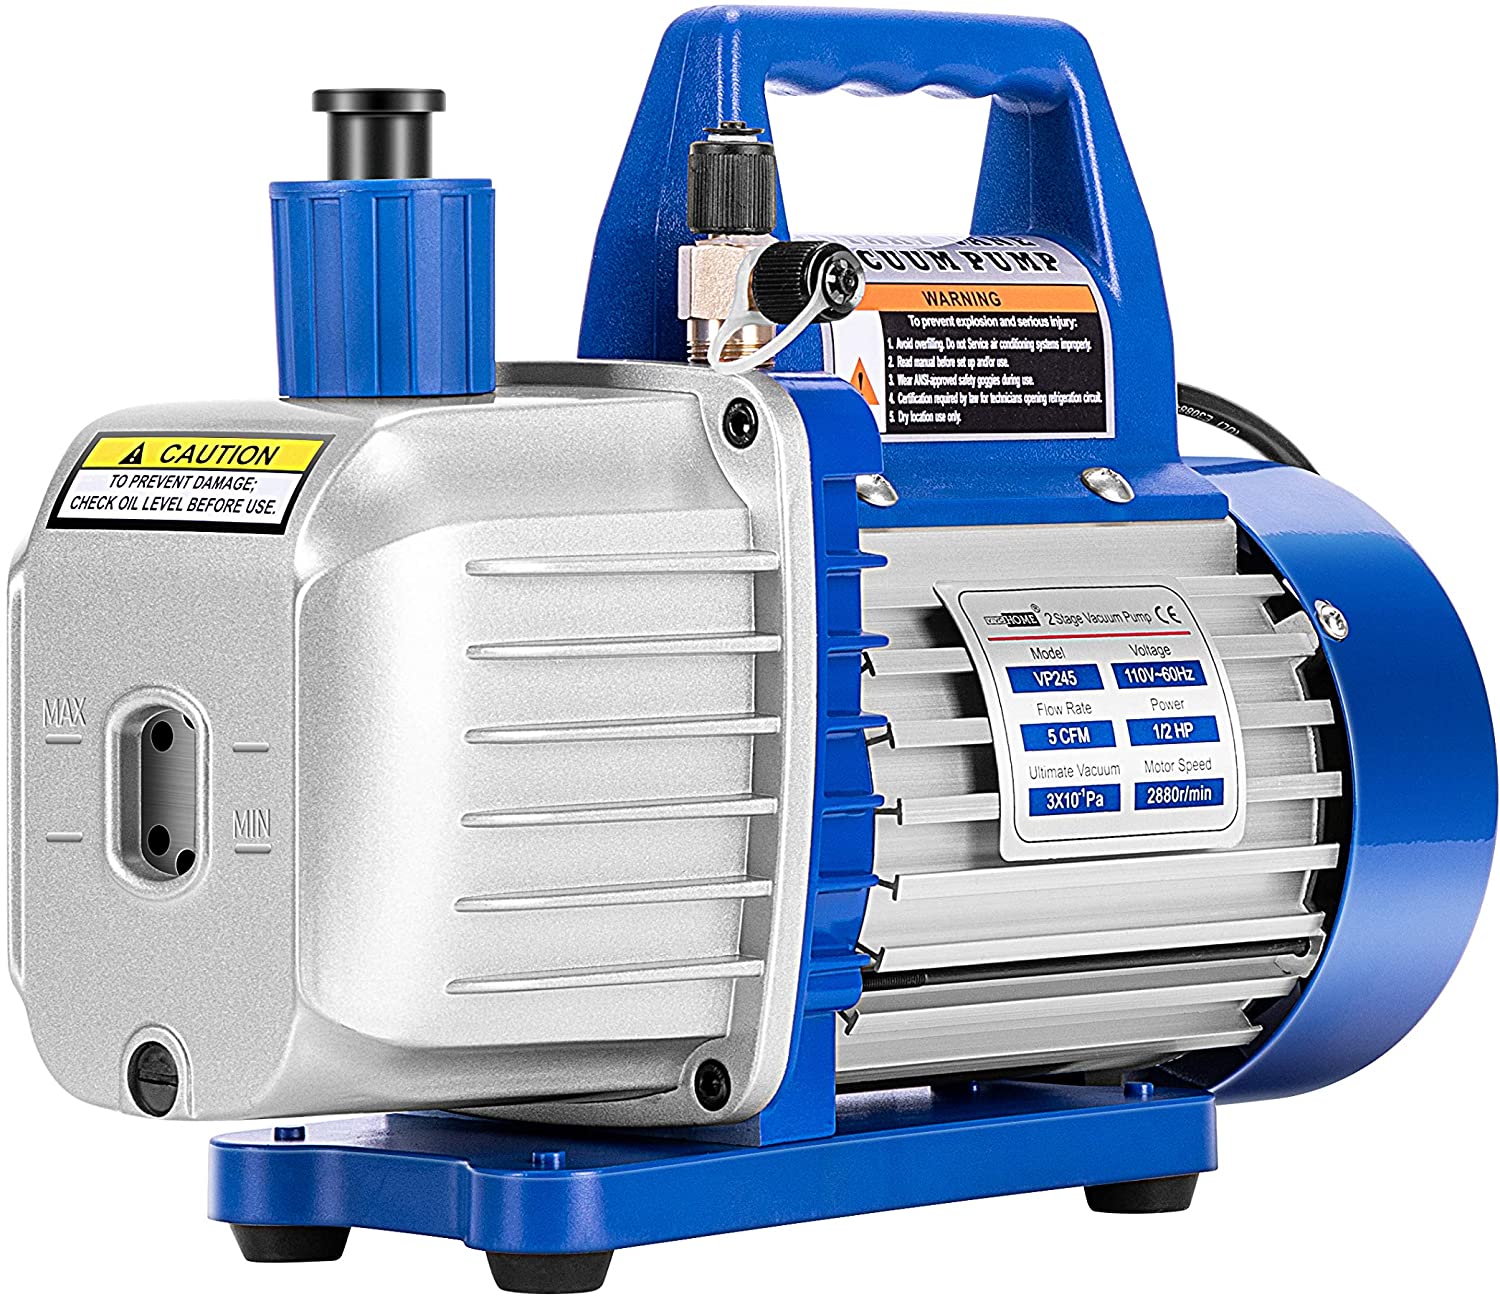 VIVOHOME 110V 1/4 HP 3.5 CFM Single Stage Rotary Vane Air Vacuum Pump with Oil Bottle ETL Listed